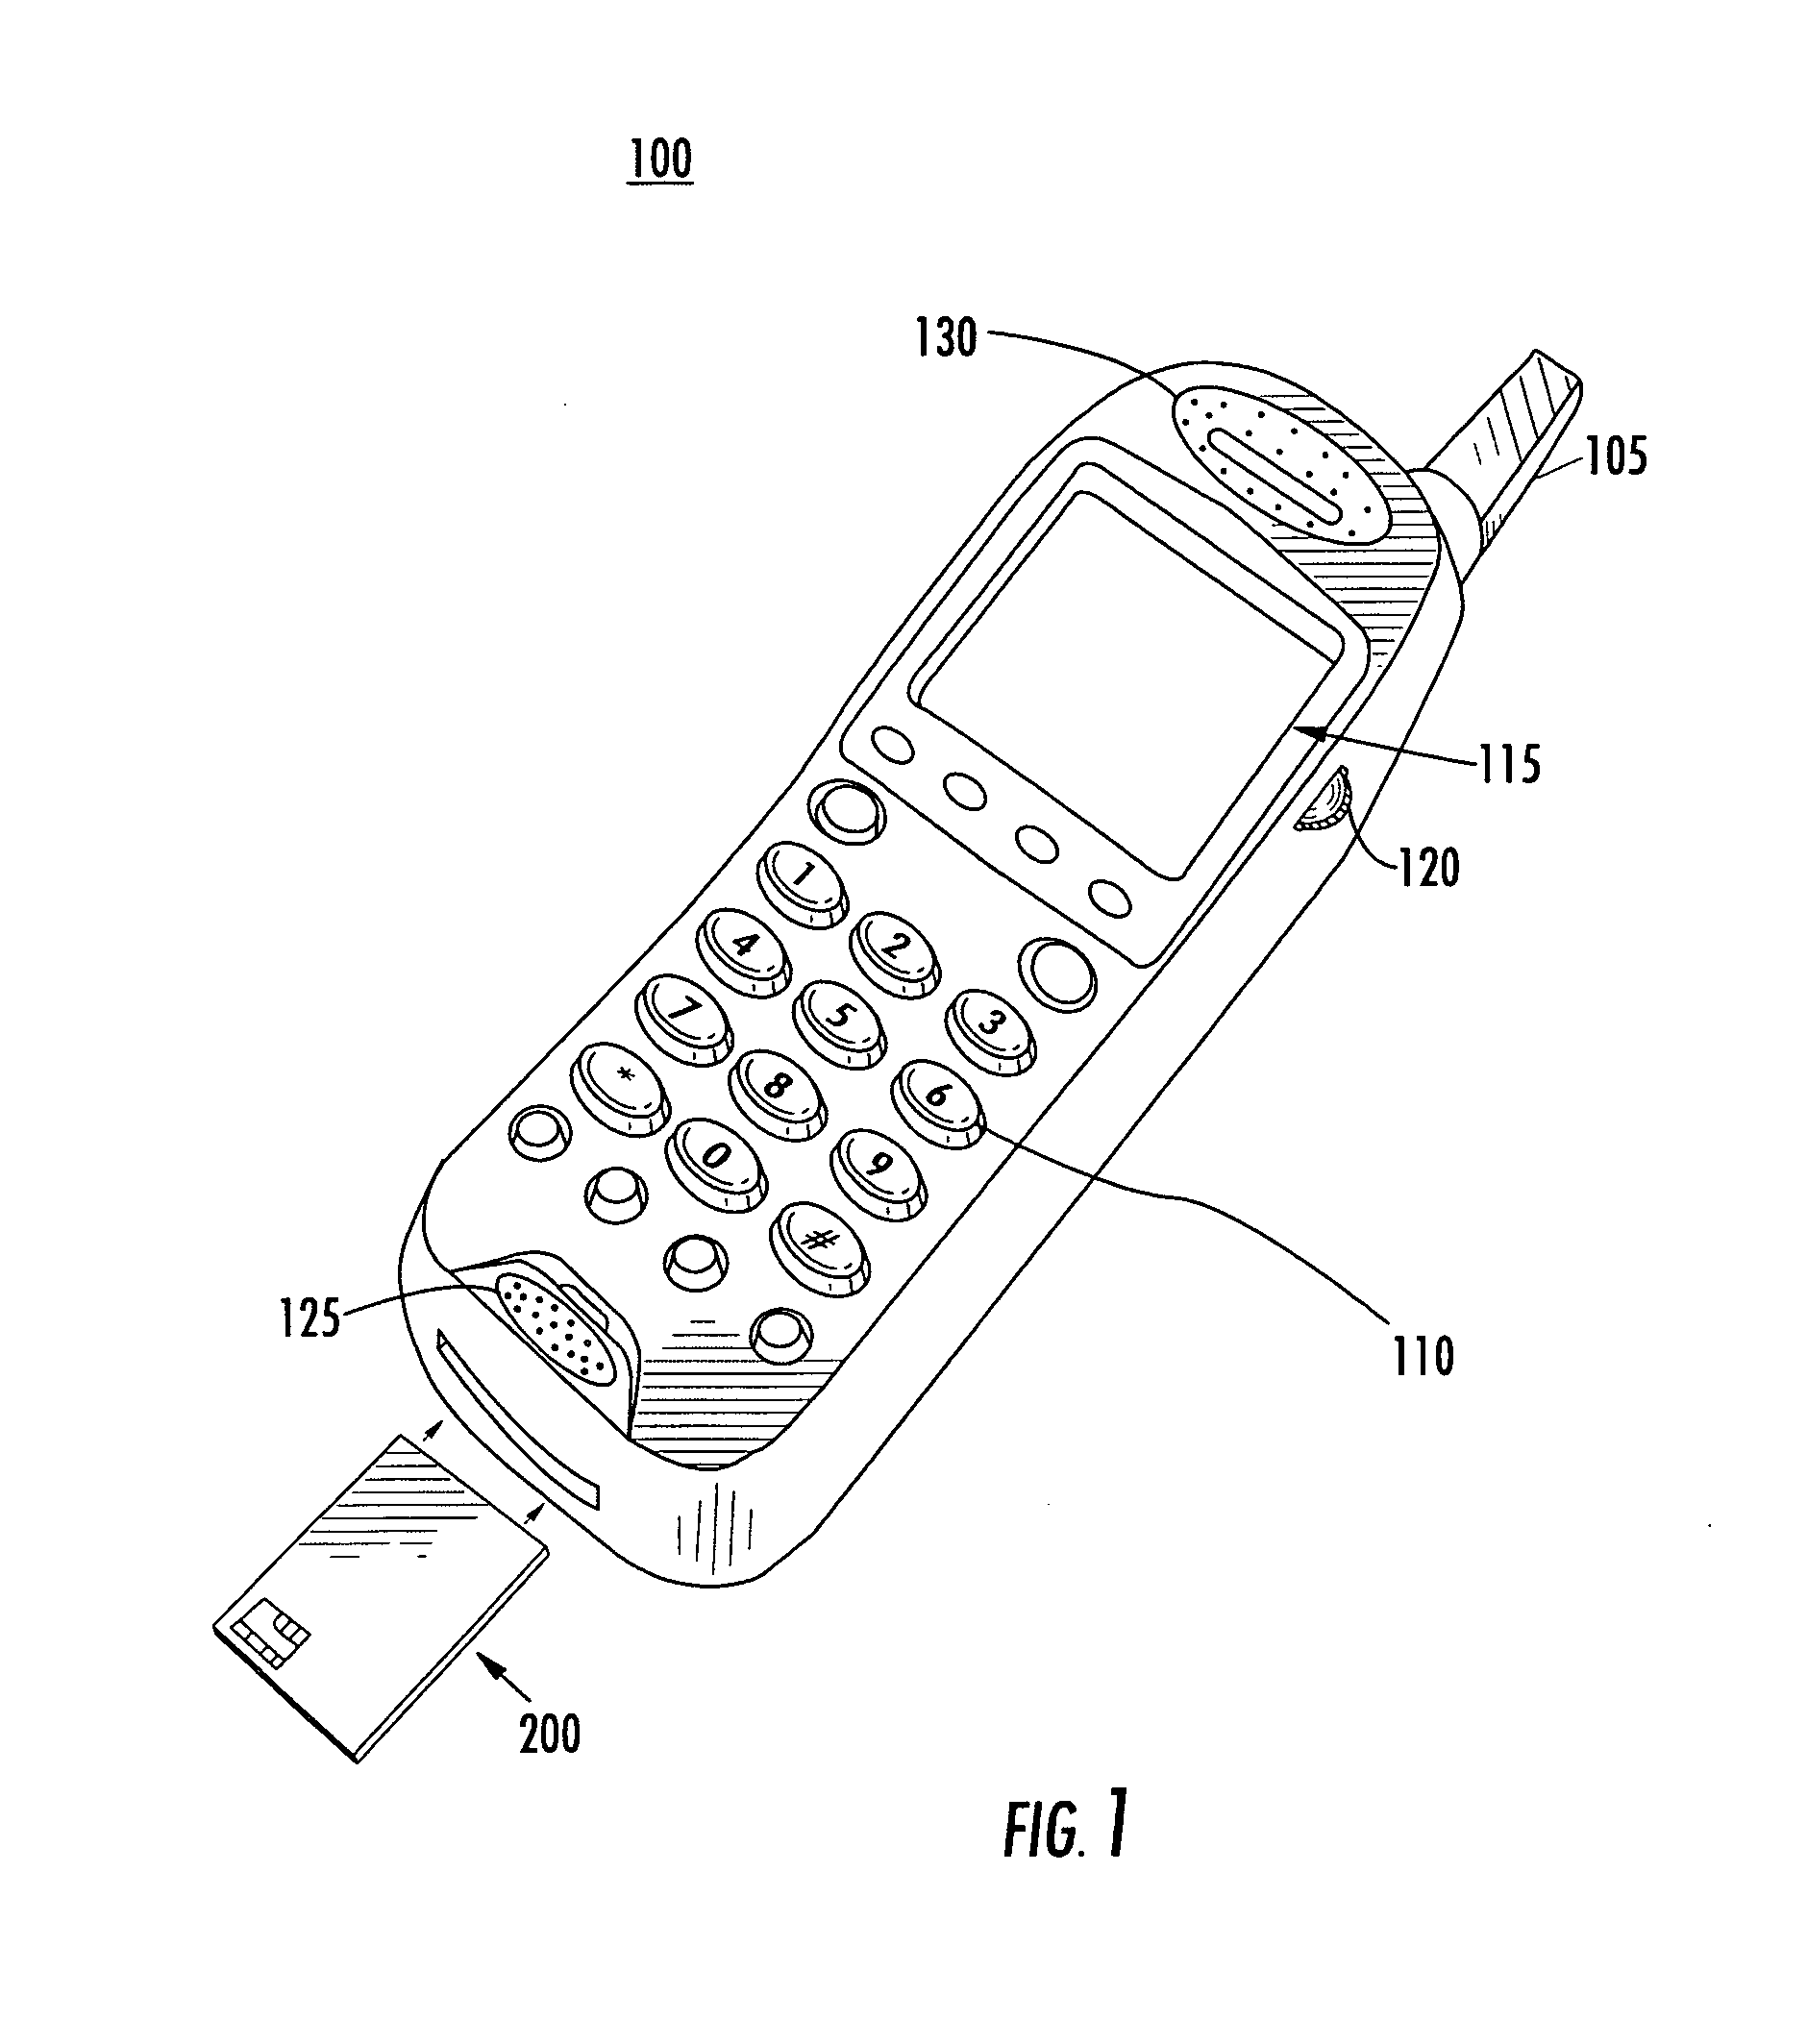 Communications device and card